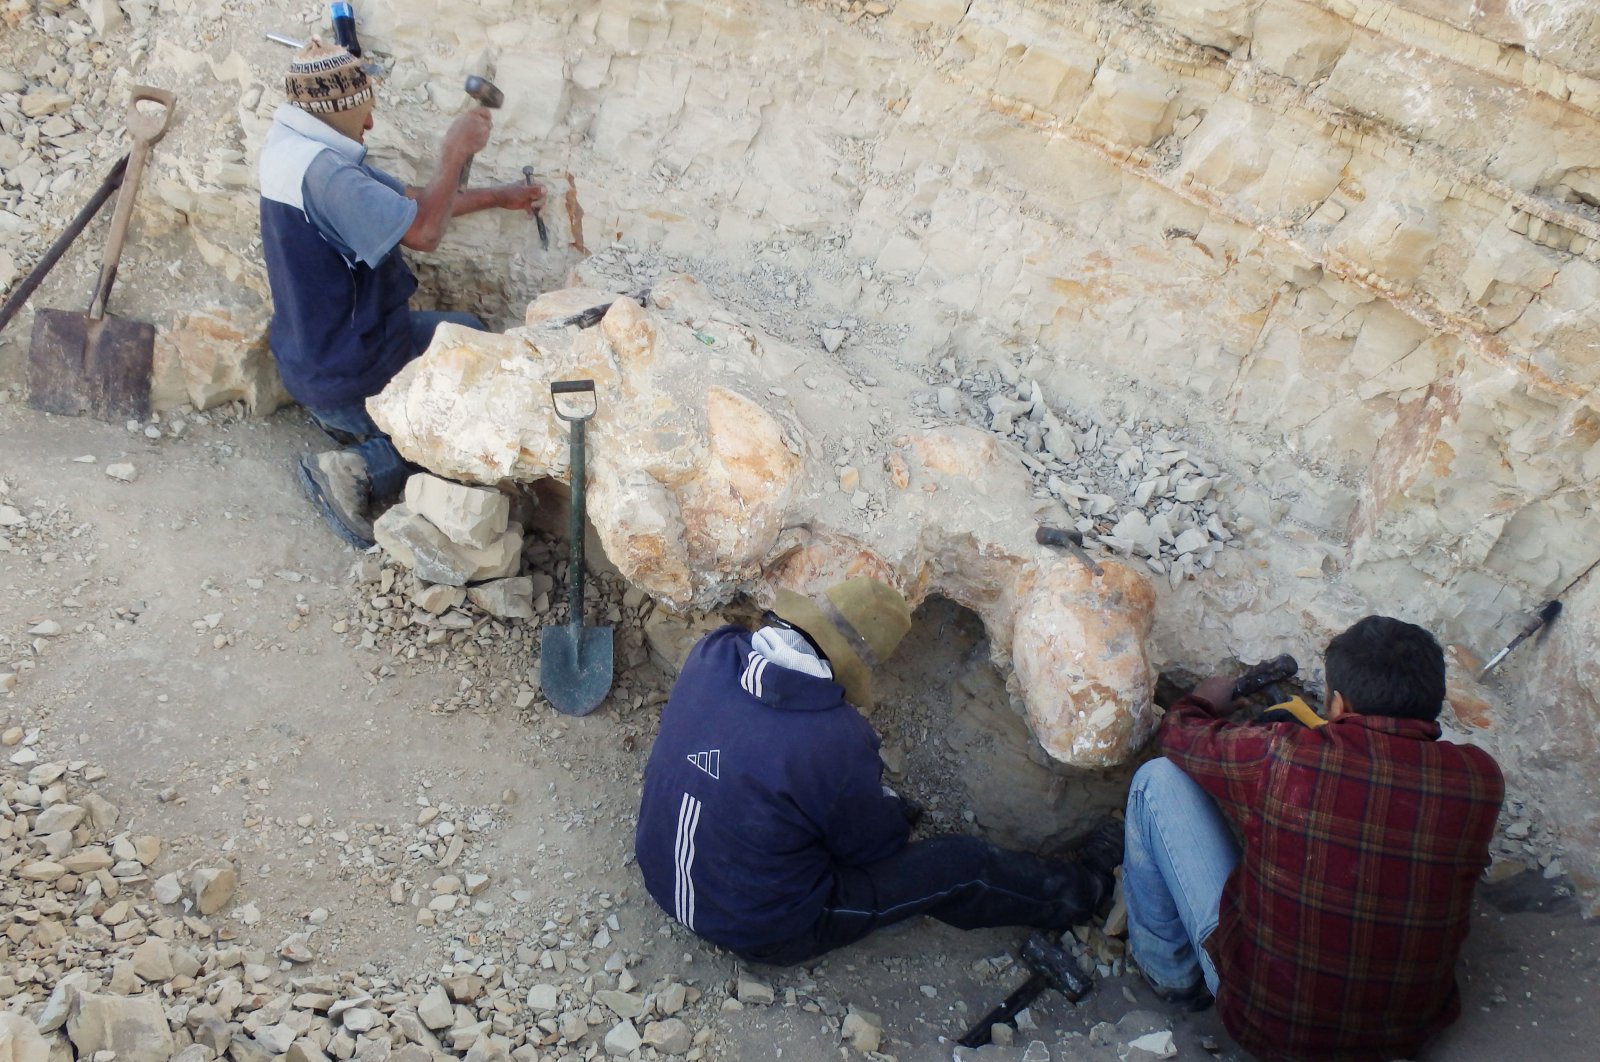 Scientists excavate a vertebra fossil of Perucetus colossus, a huge early whale that lived about 38-40 million years ago, in a remote coastal desert in southern Peru, as seen in this undated photograph. (Giovanni Bianucci/Handout via Reuters)